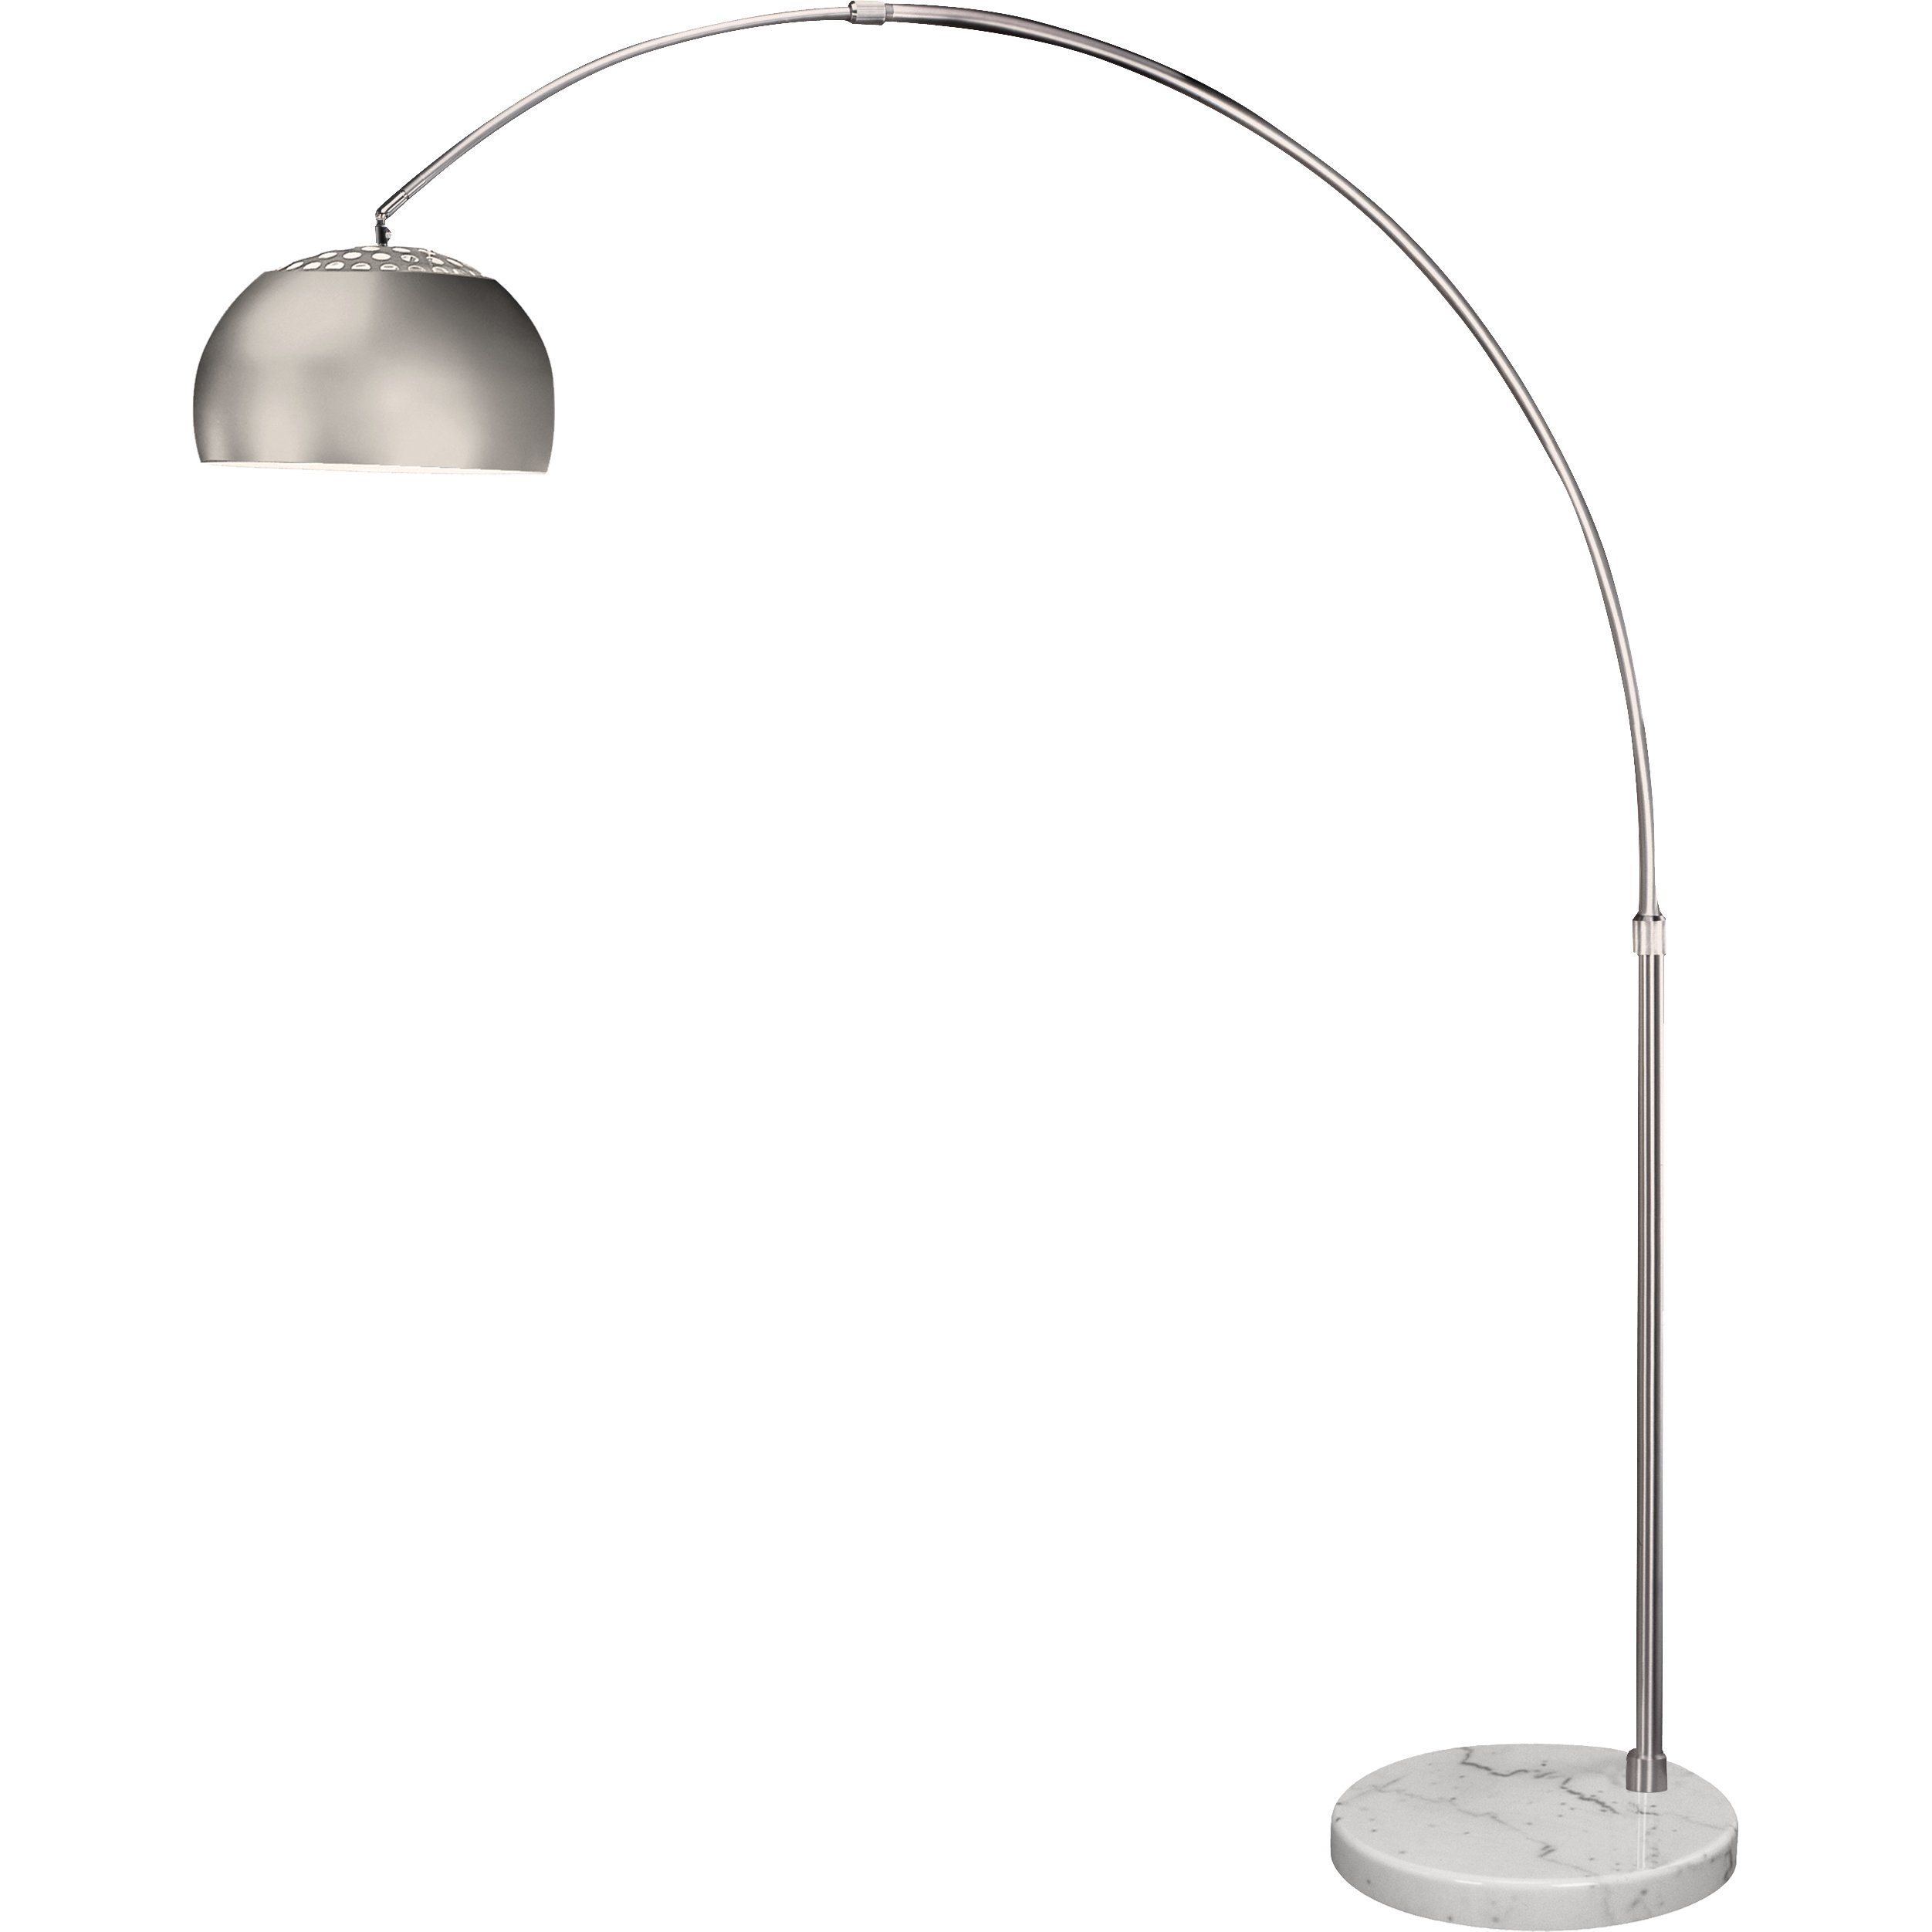 Trend Acclaim Lighting Mid 73 Inch Arc Floor Lamp Big pertaining to dimensions 2503 X 2503